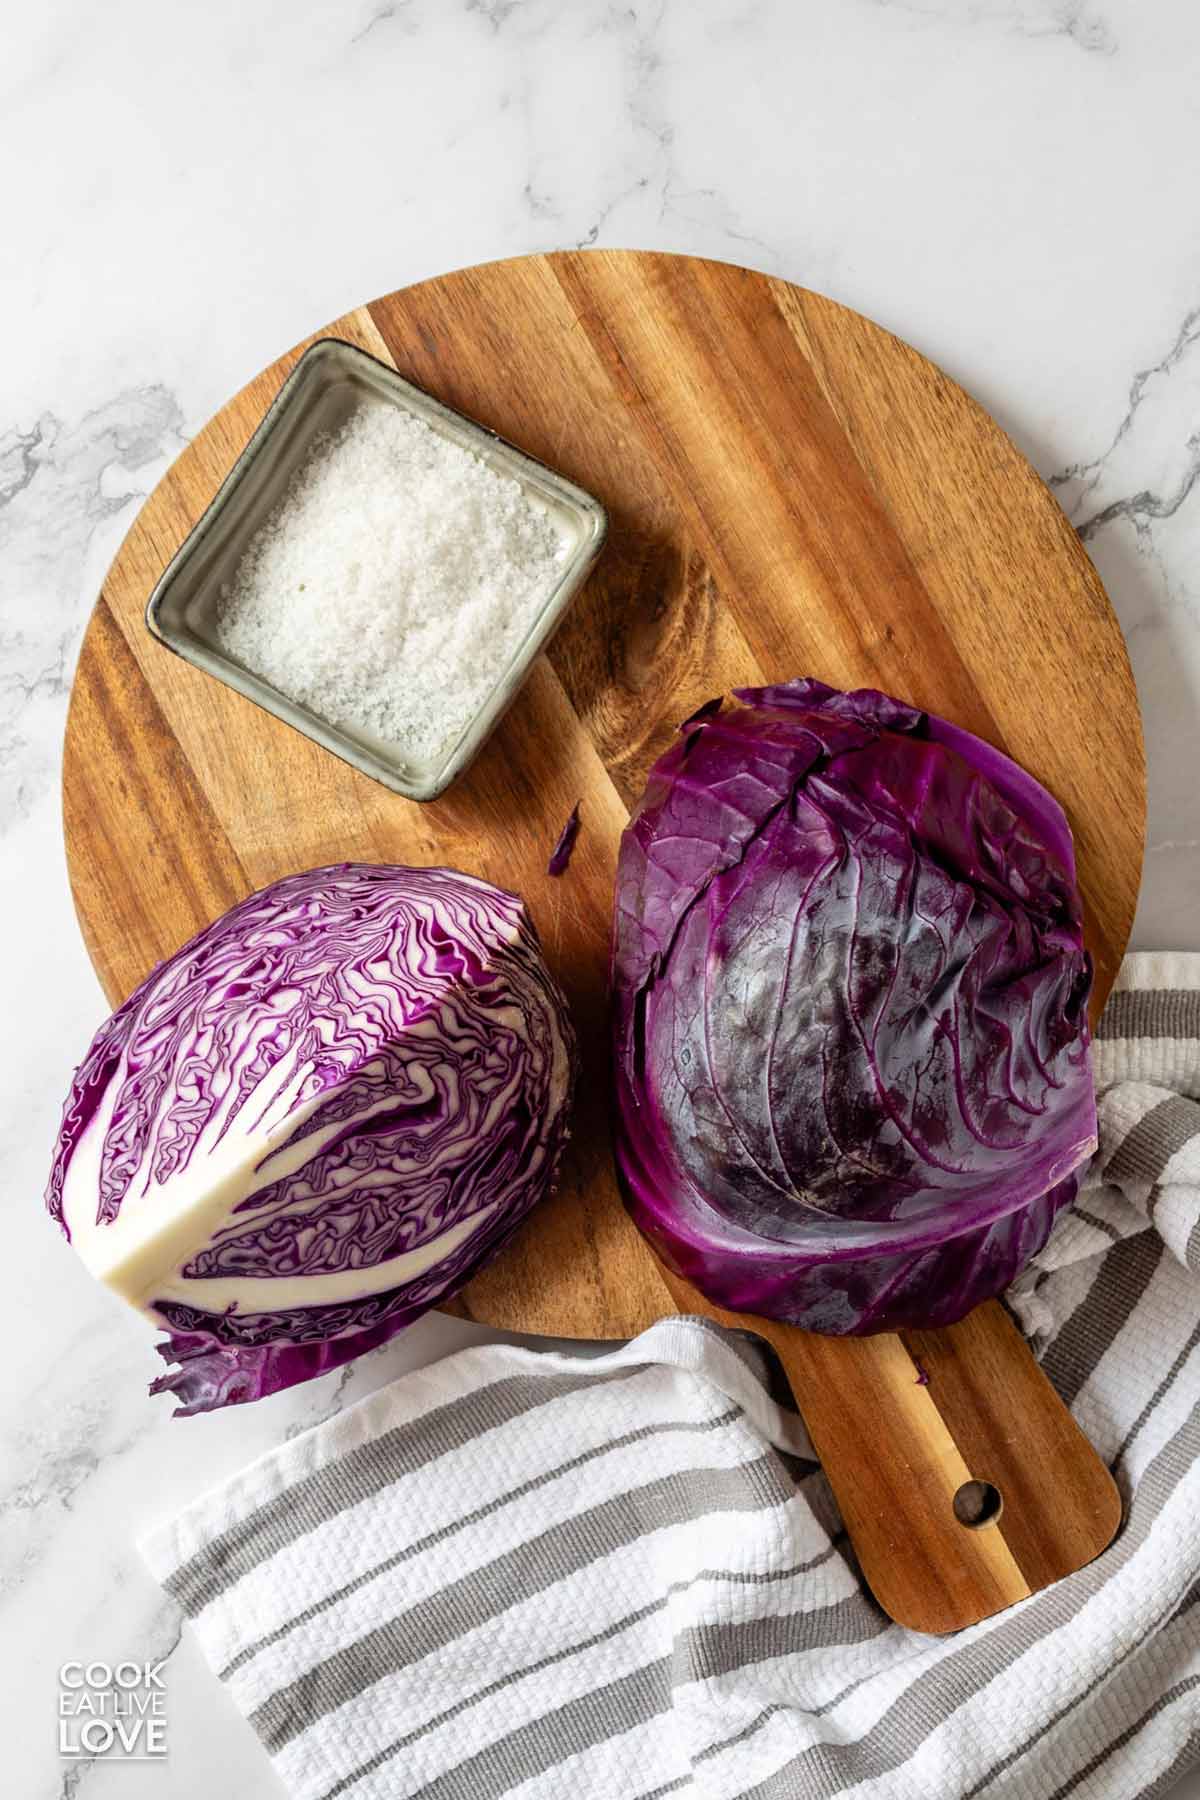 Ingredients to make sauerkraut with red cabbage on the table.